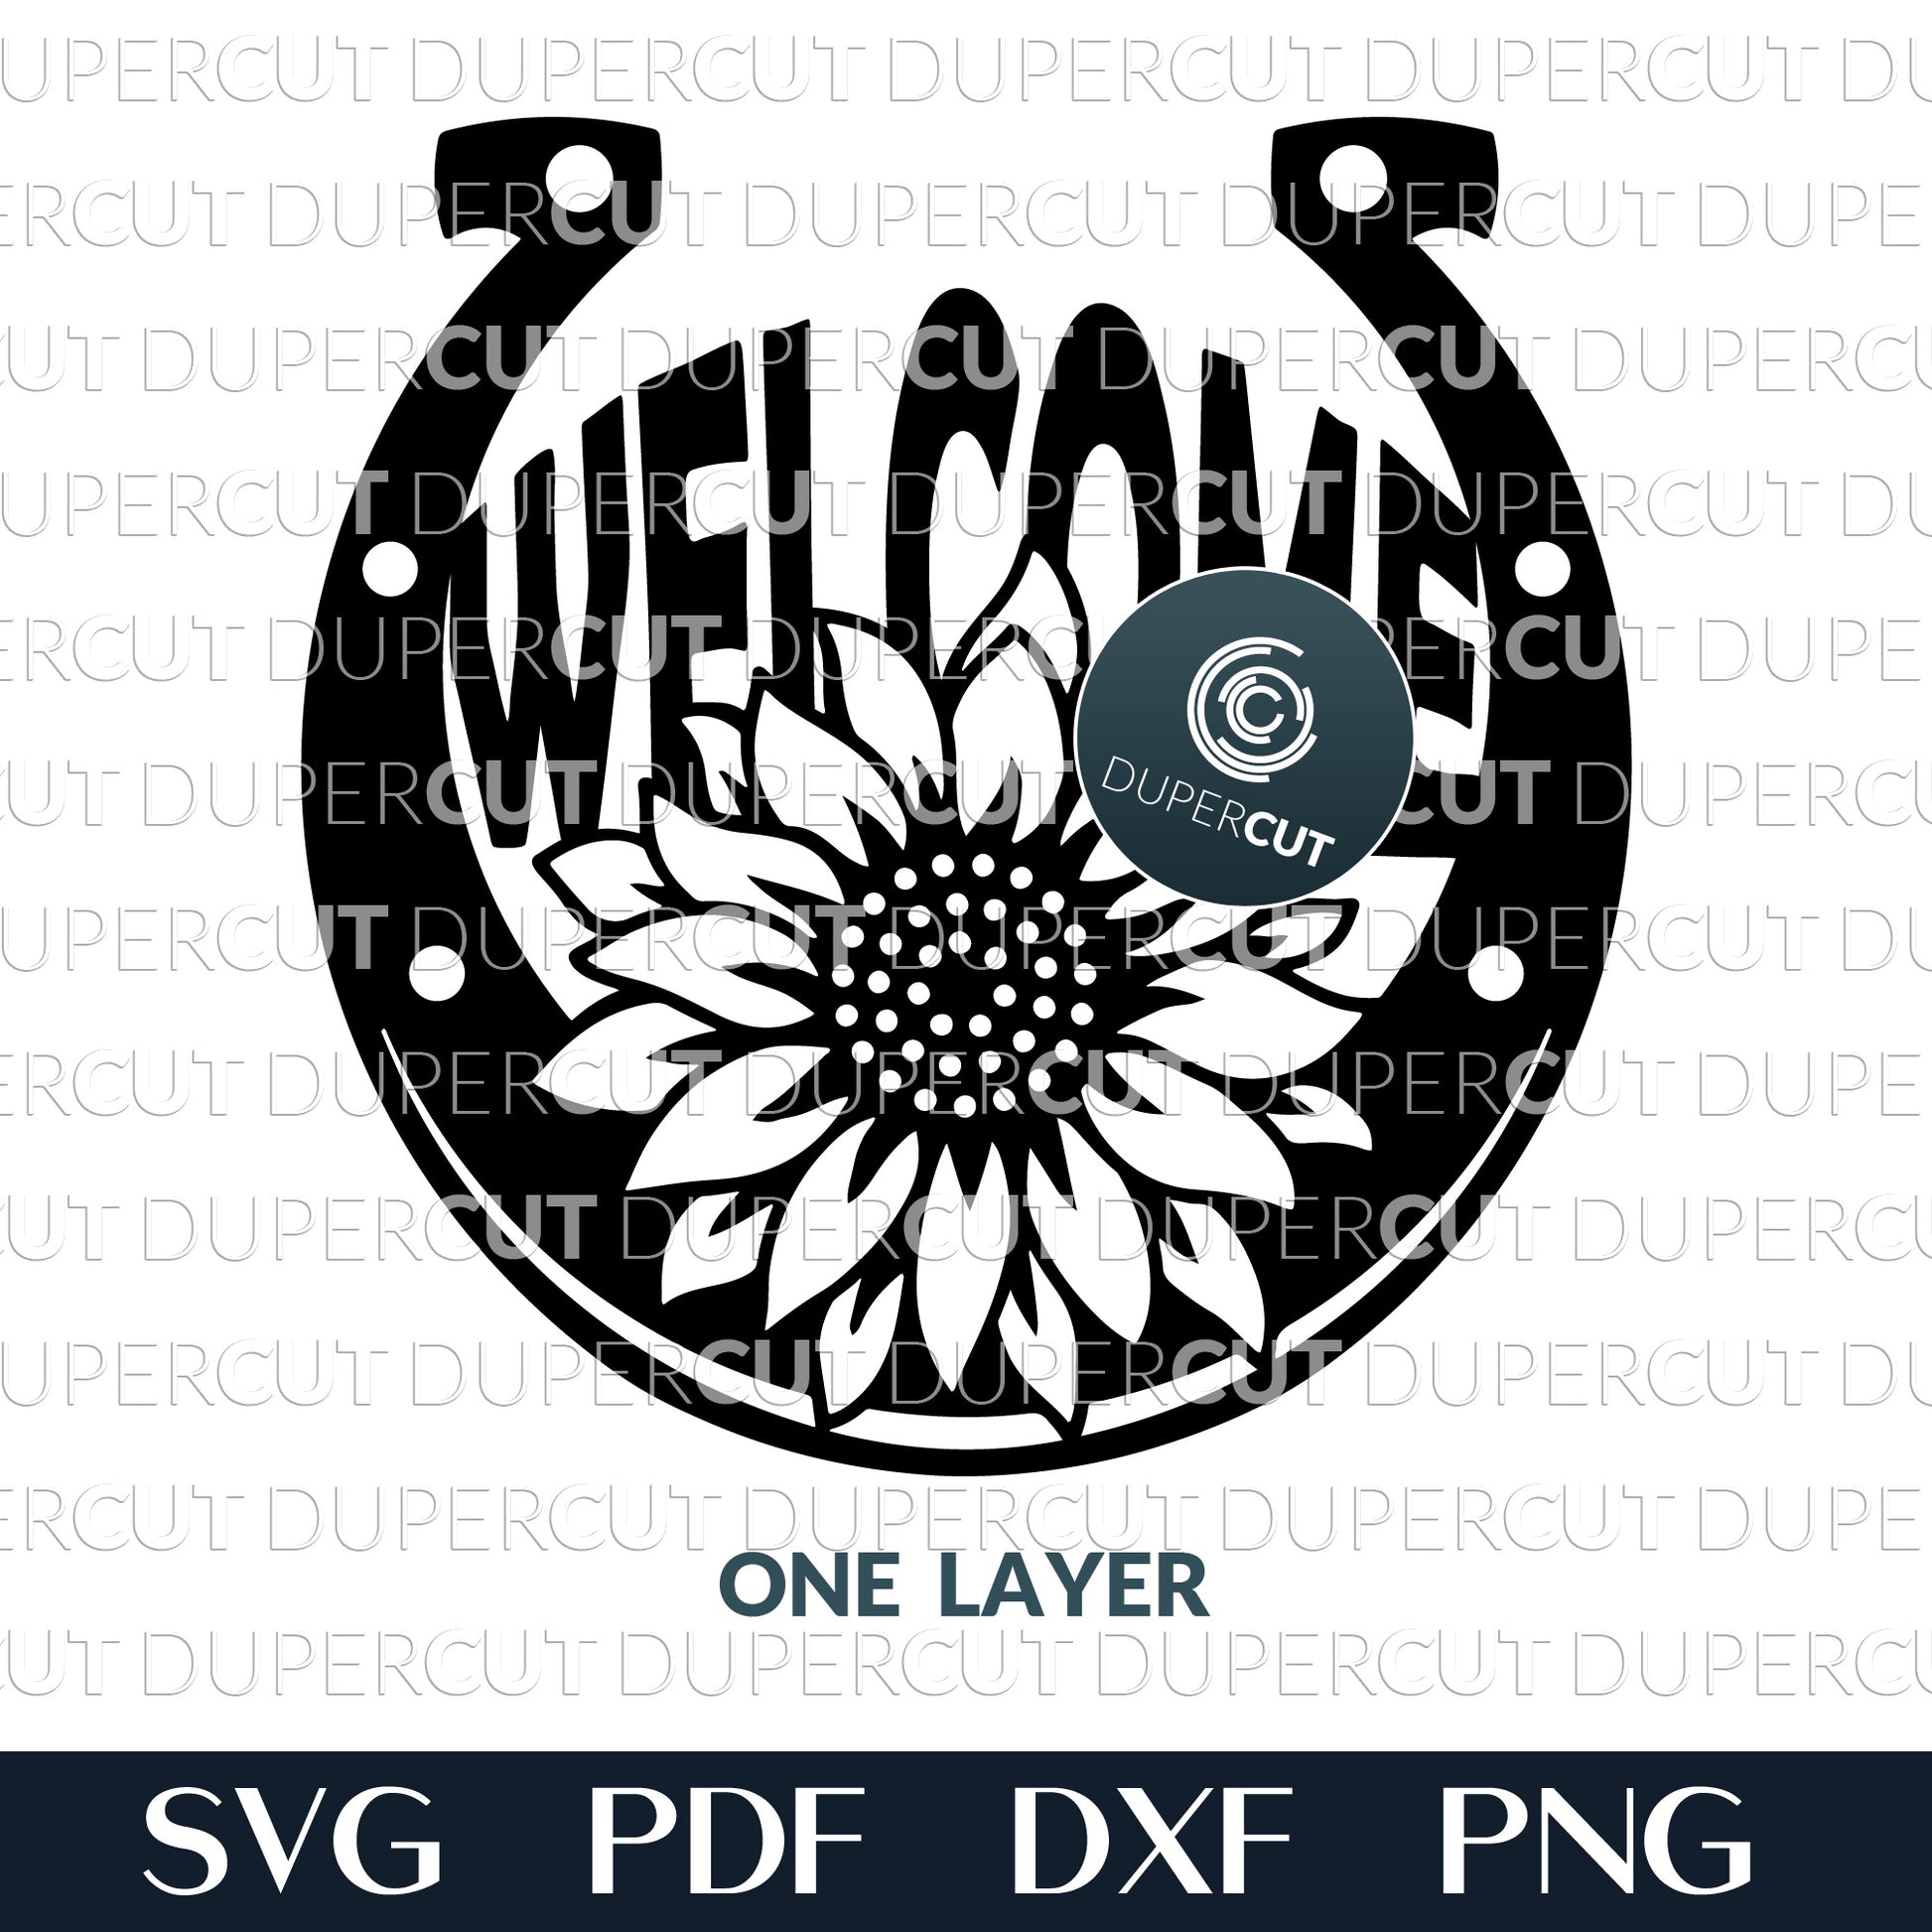 Horseshoe sunflower welcome sign paper cutting template - SVG PDF DXF laser cutting files for Glowforge, Cricut, Silhouette Cameo, CNC plasma machines by DuperCut